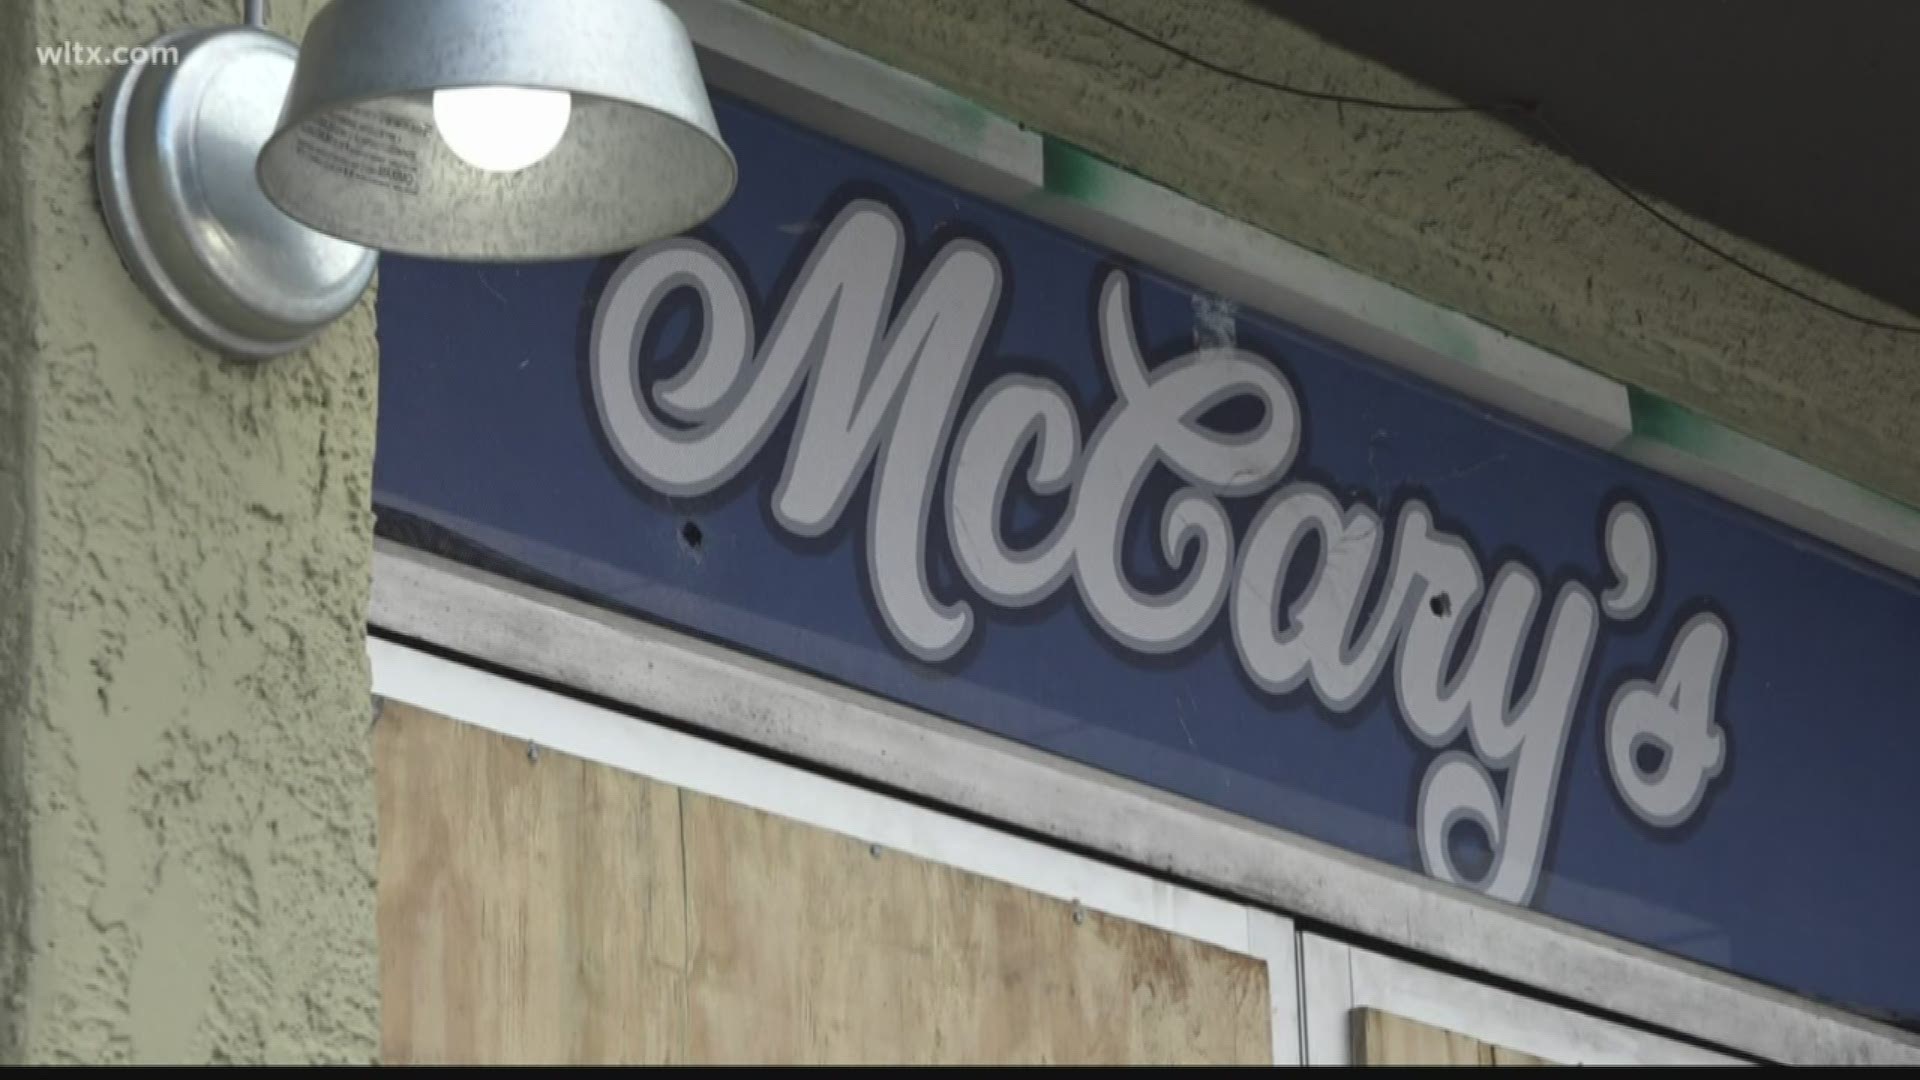 Two people have died and two others were injured after a shooting early Thursday morning at McCary's Bar and Grill on Bush River Road.